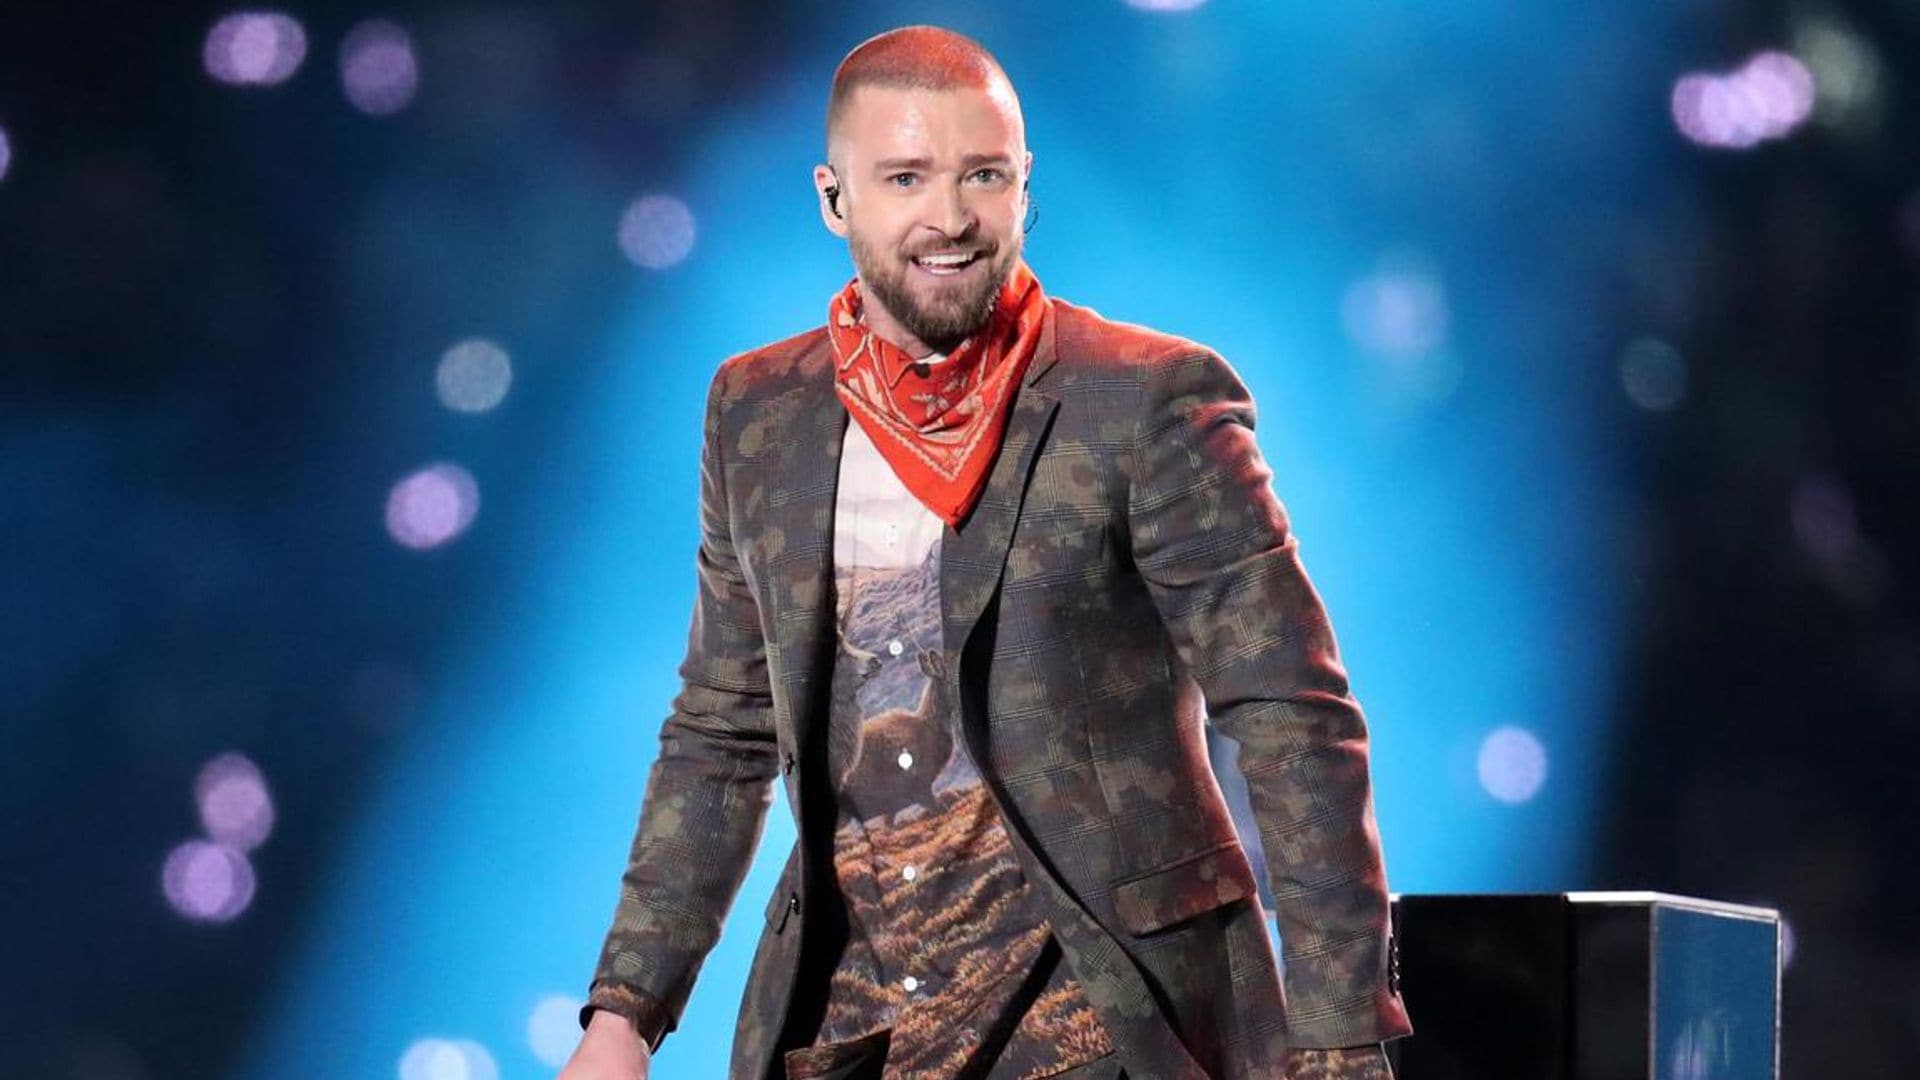 Justin Timberlake reveals his pick in U.S. presidential election